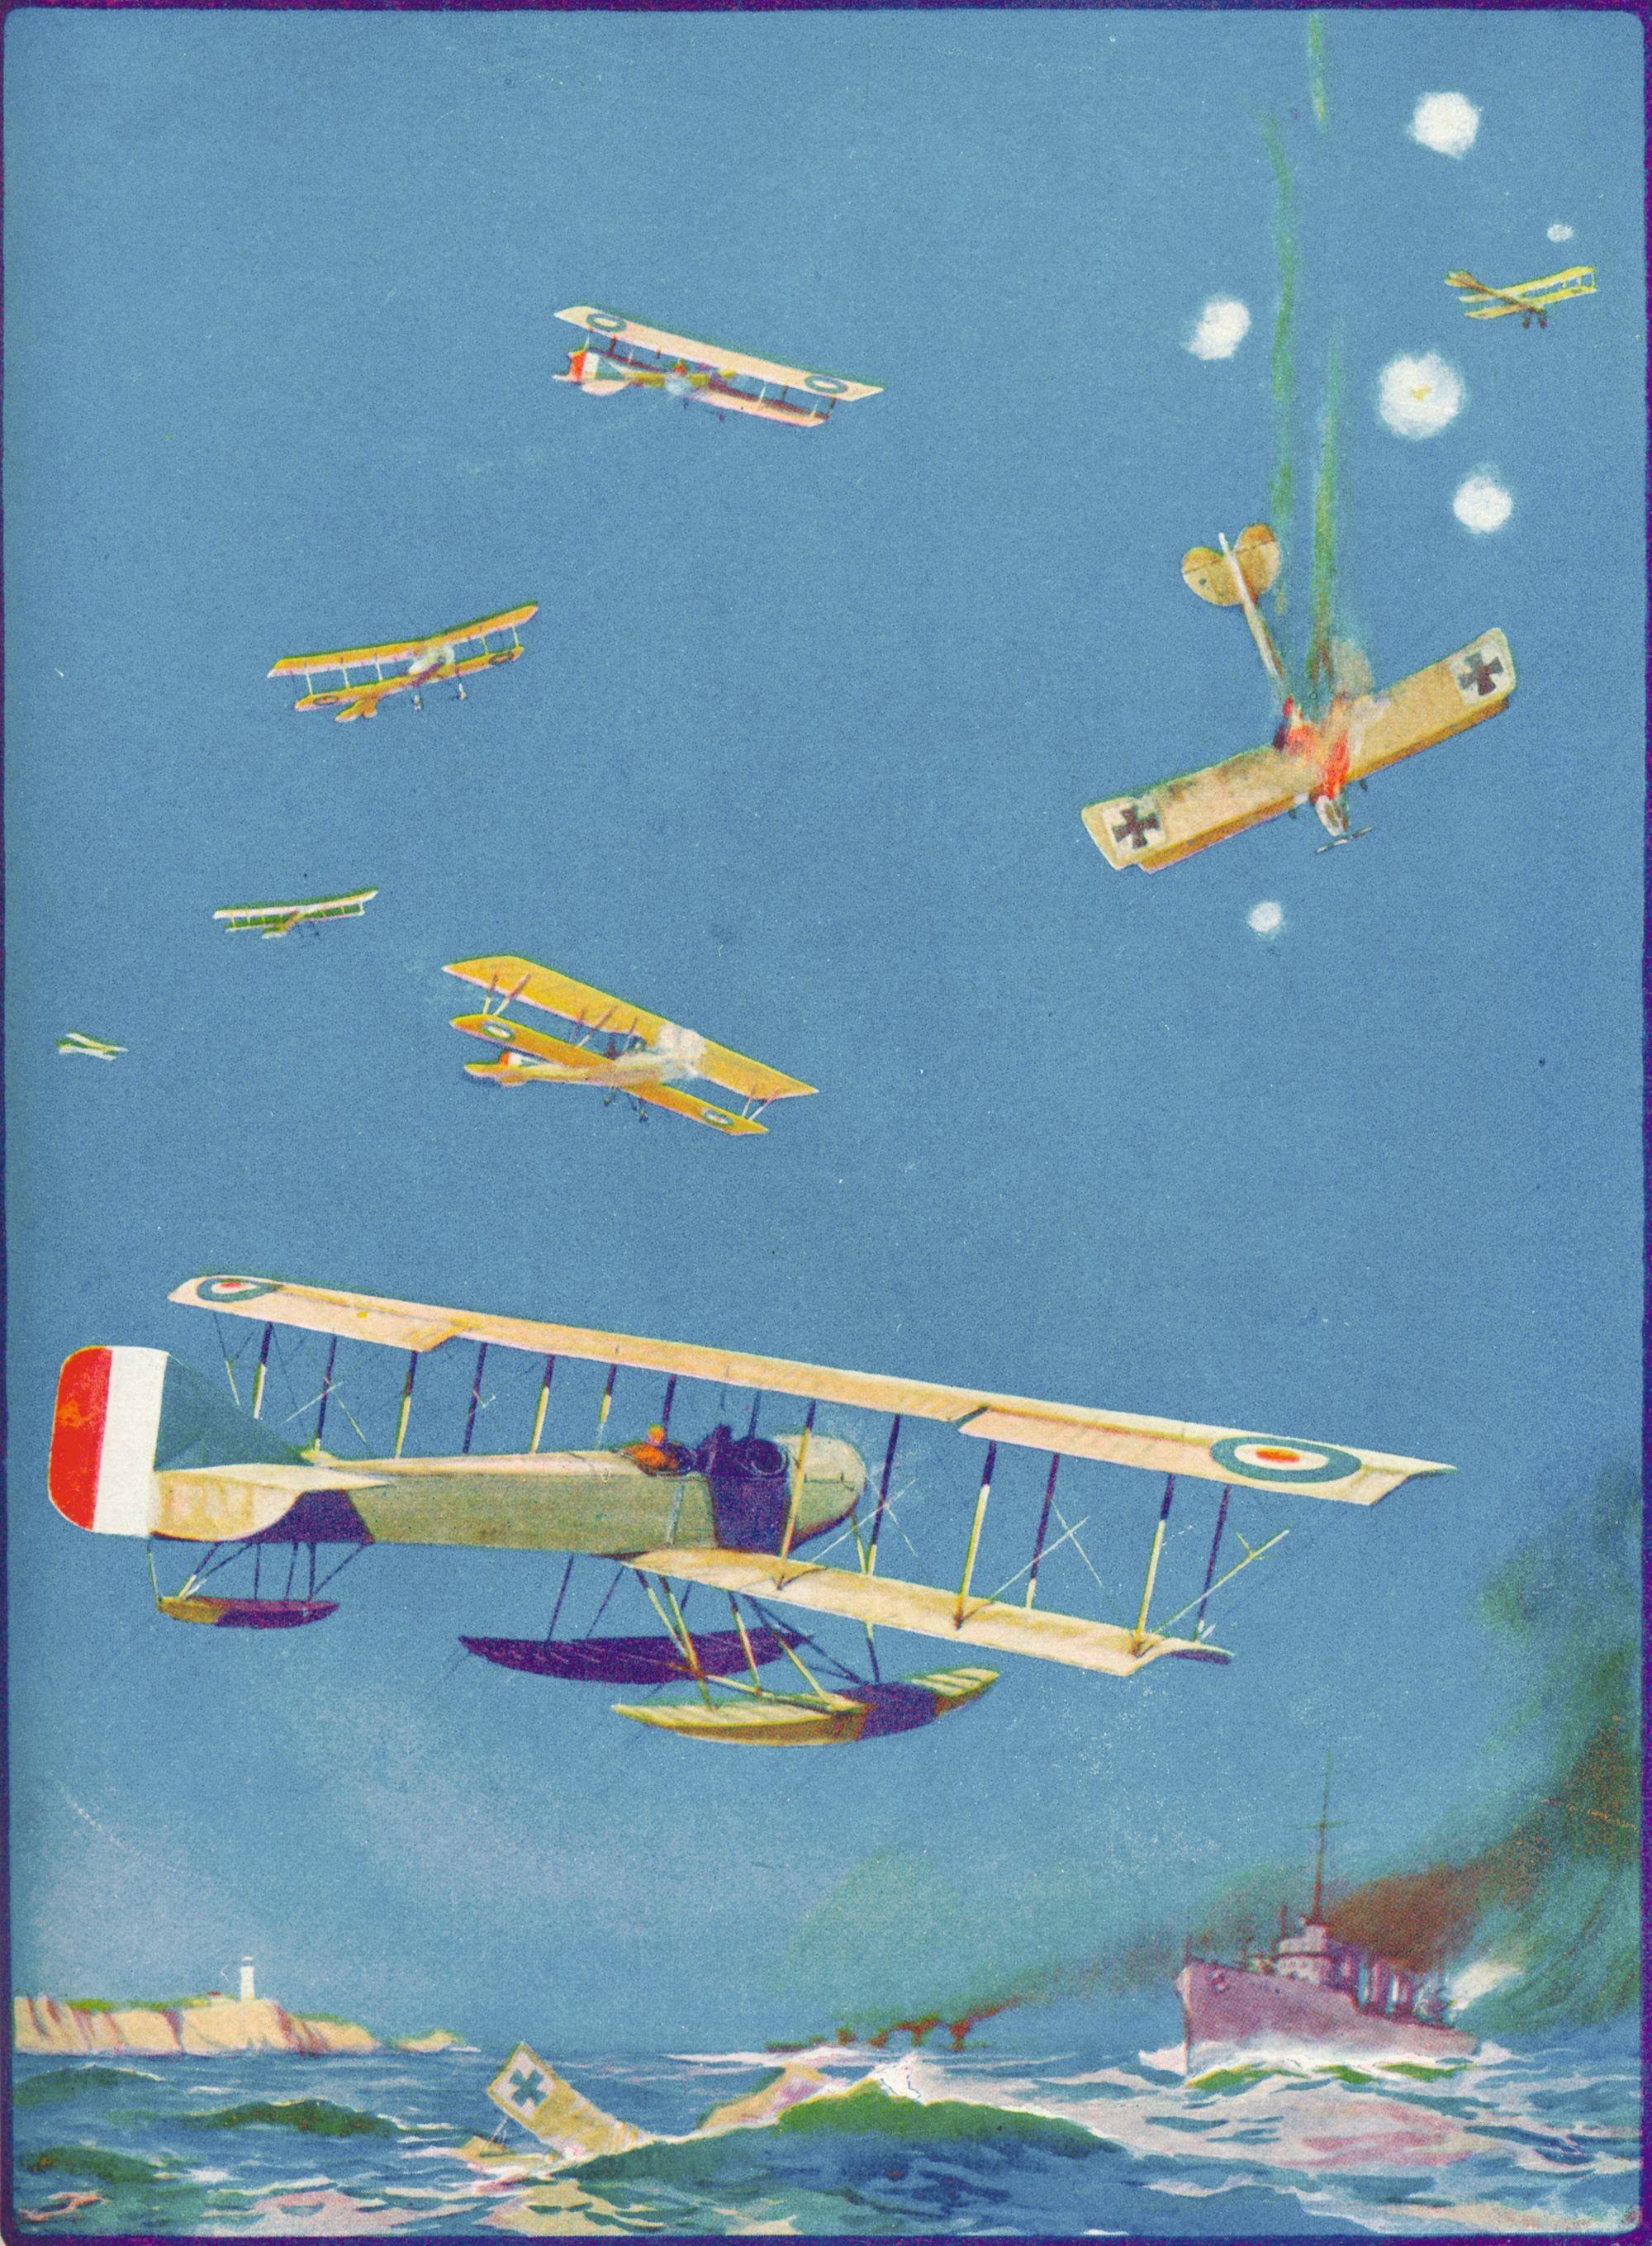 « Défense des côtes », illustration dans The Wonder Book of Aircraft for Boys and Girls, 1919